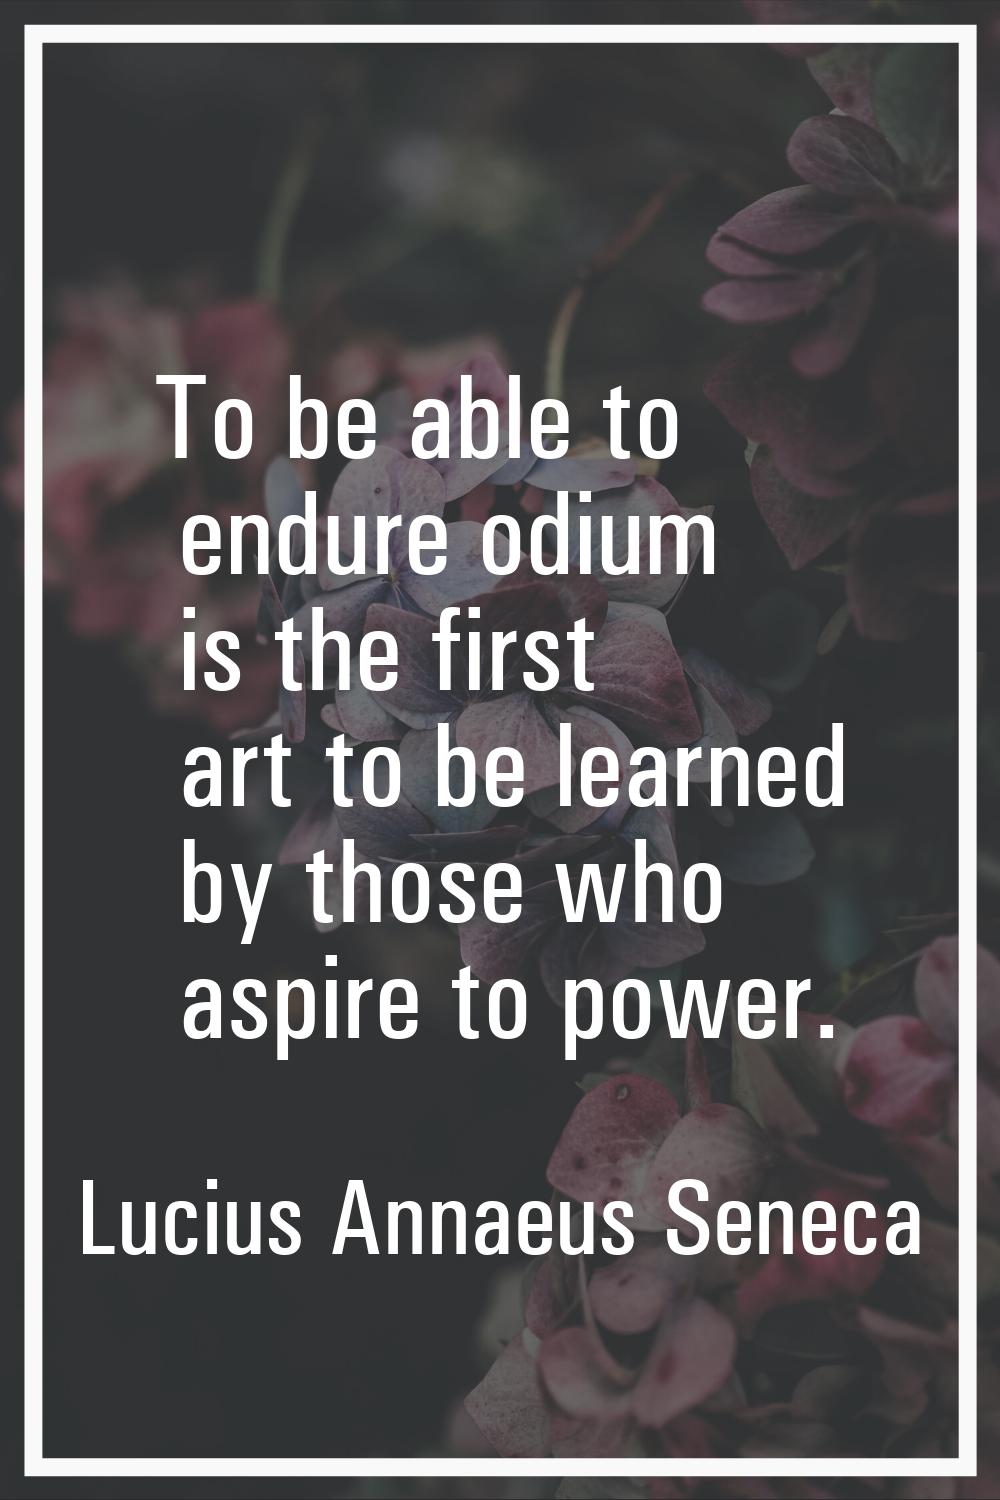 To be able to endure odium is the first art to be learned by those who aspire to power.